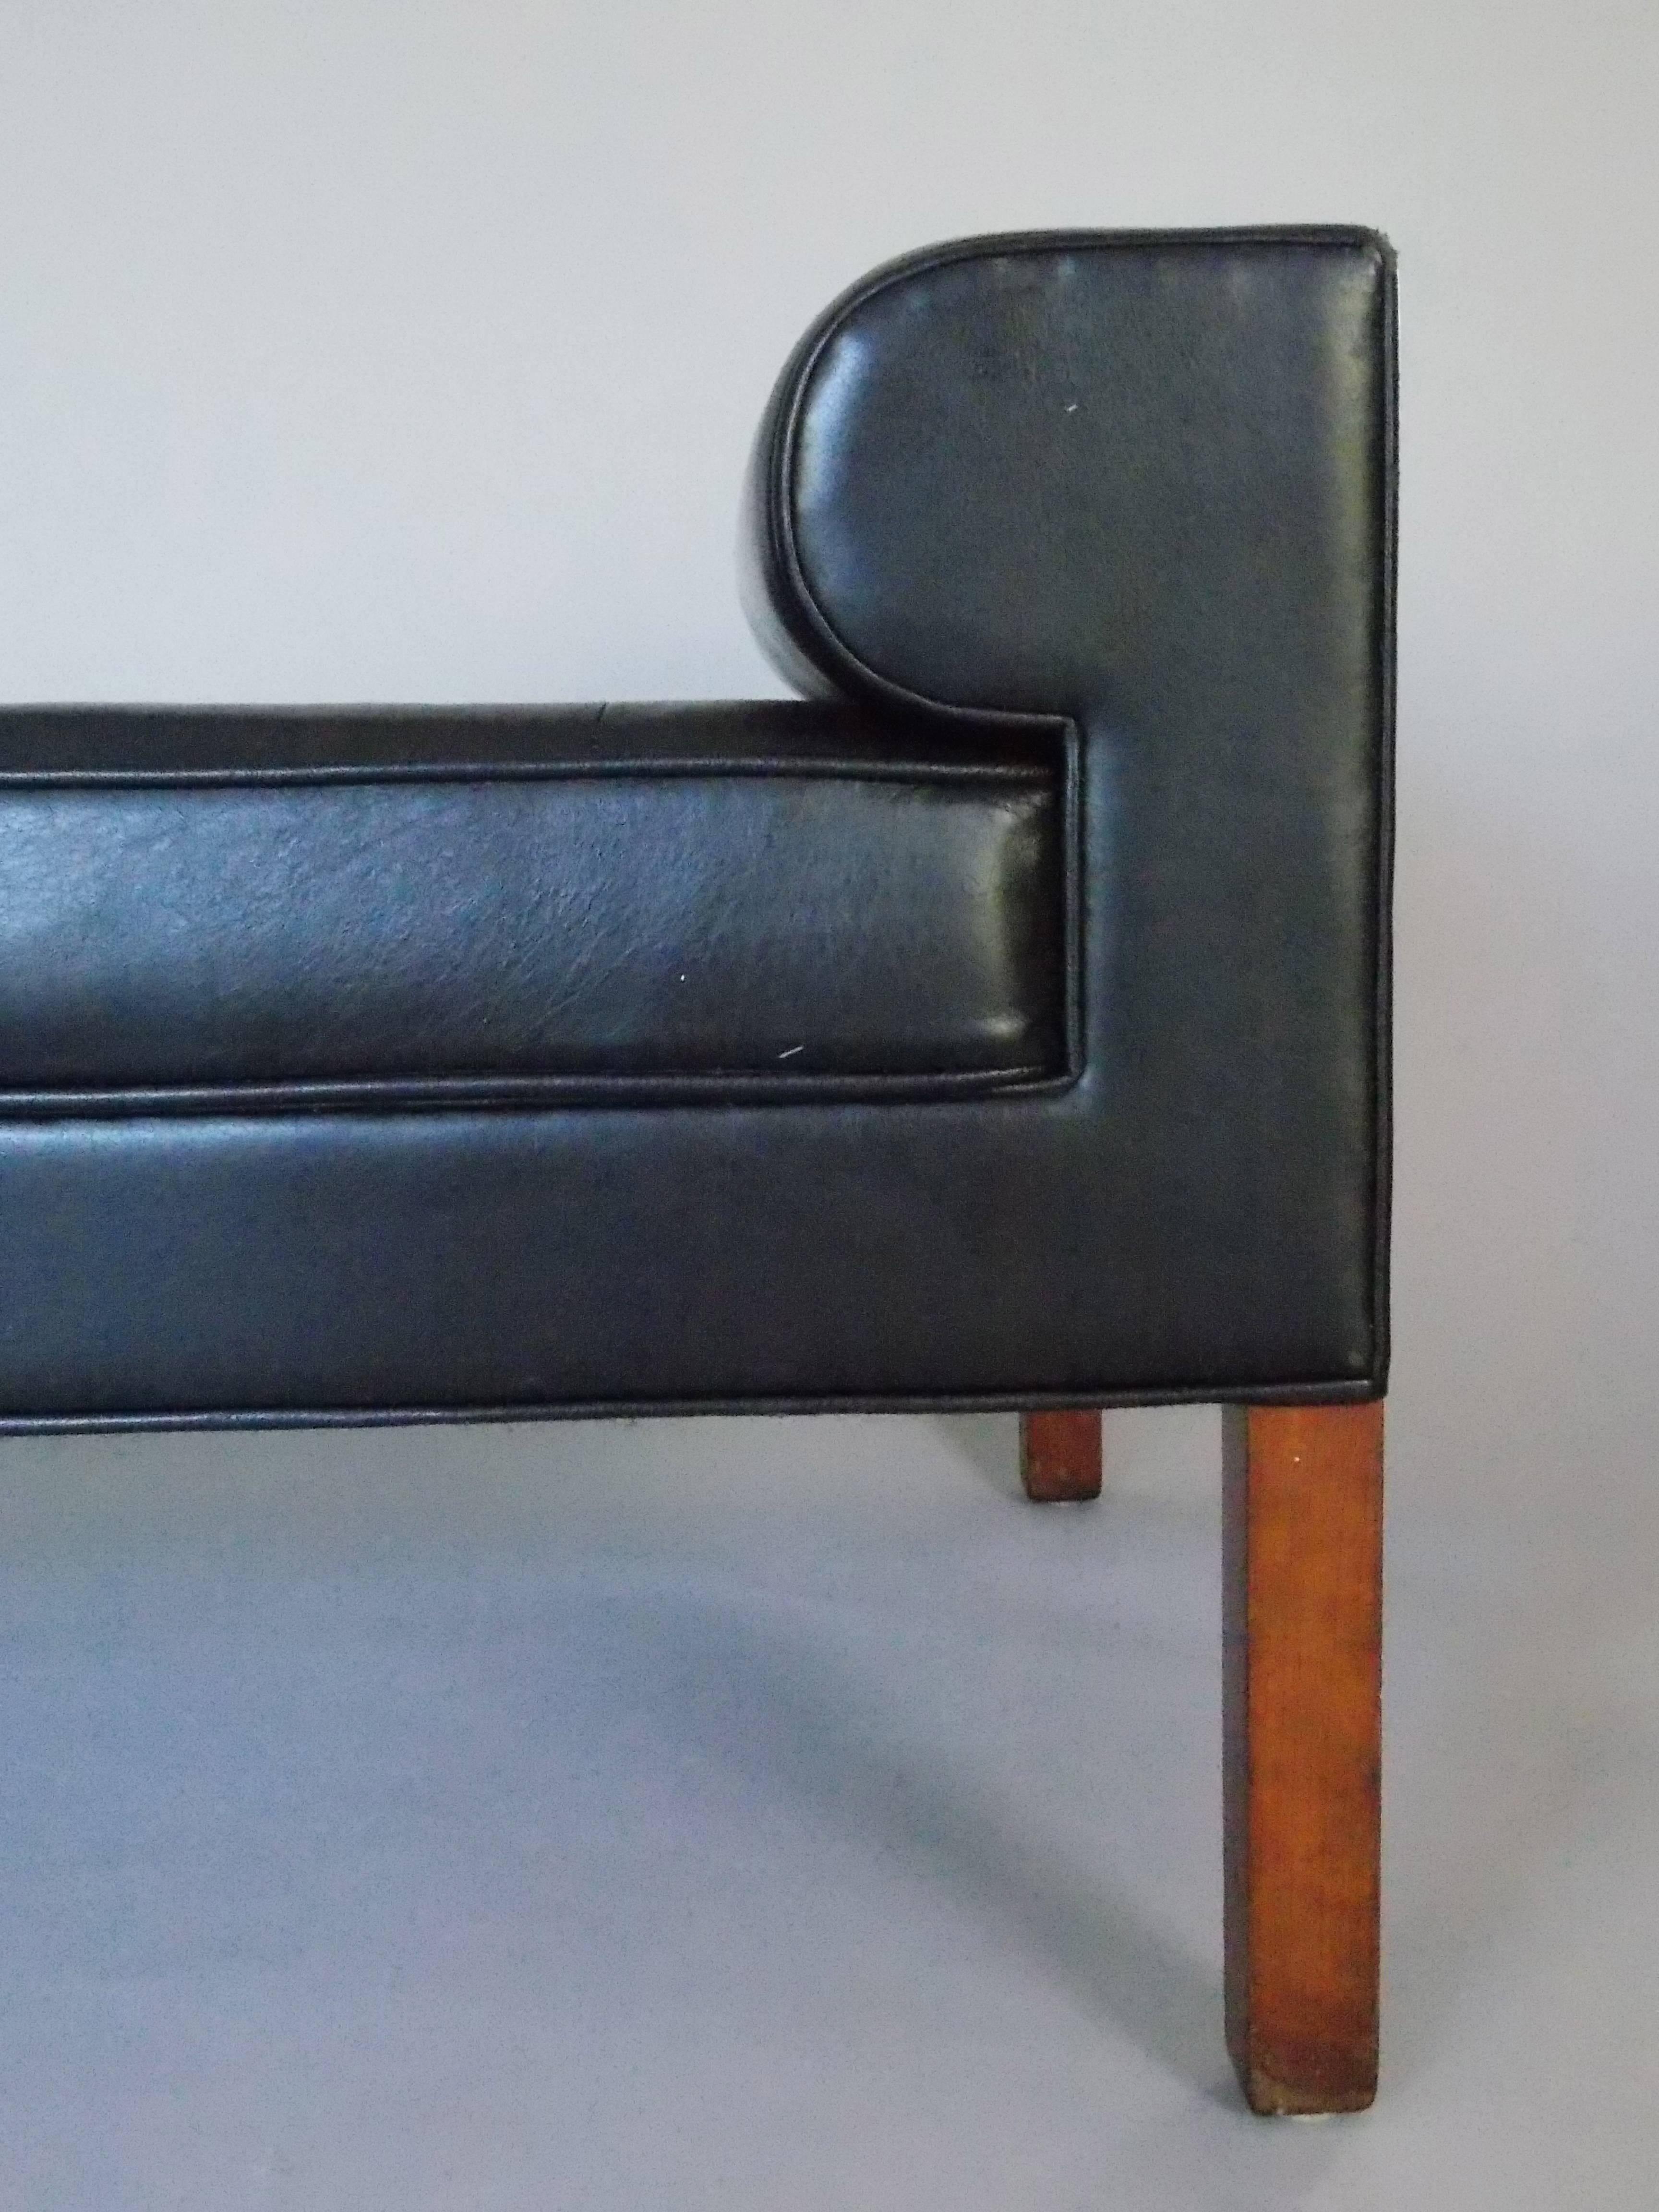 A nice architectural design.
Quality made.
Wood construction with upholstered leather and walnut legs.
It's in the original vintage condition showing ware consistent with age, some scuffs, no major damage.
It can be reupholstered or left as is. We